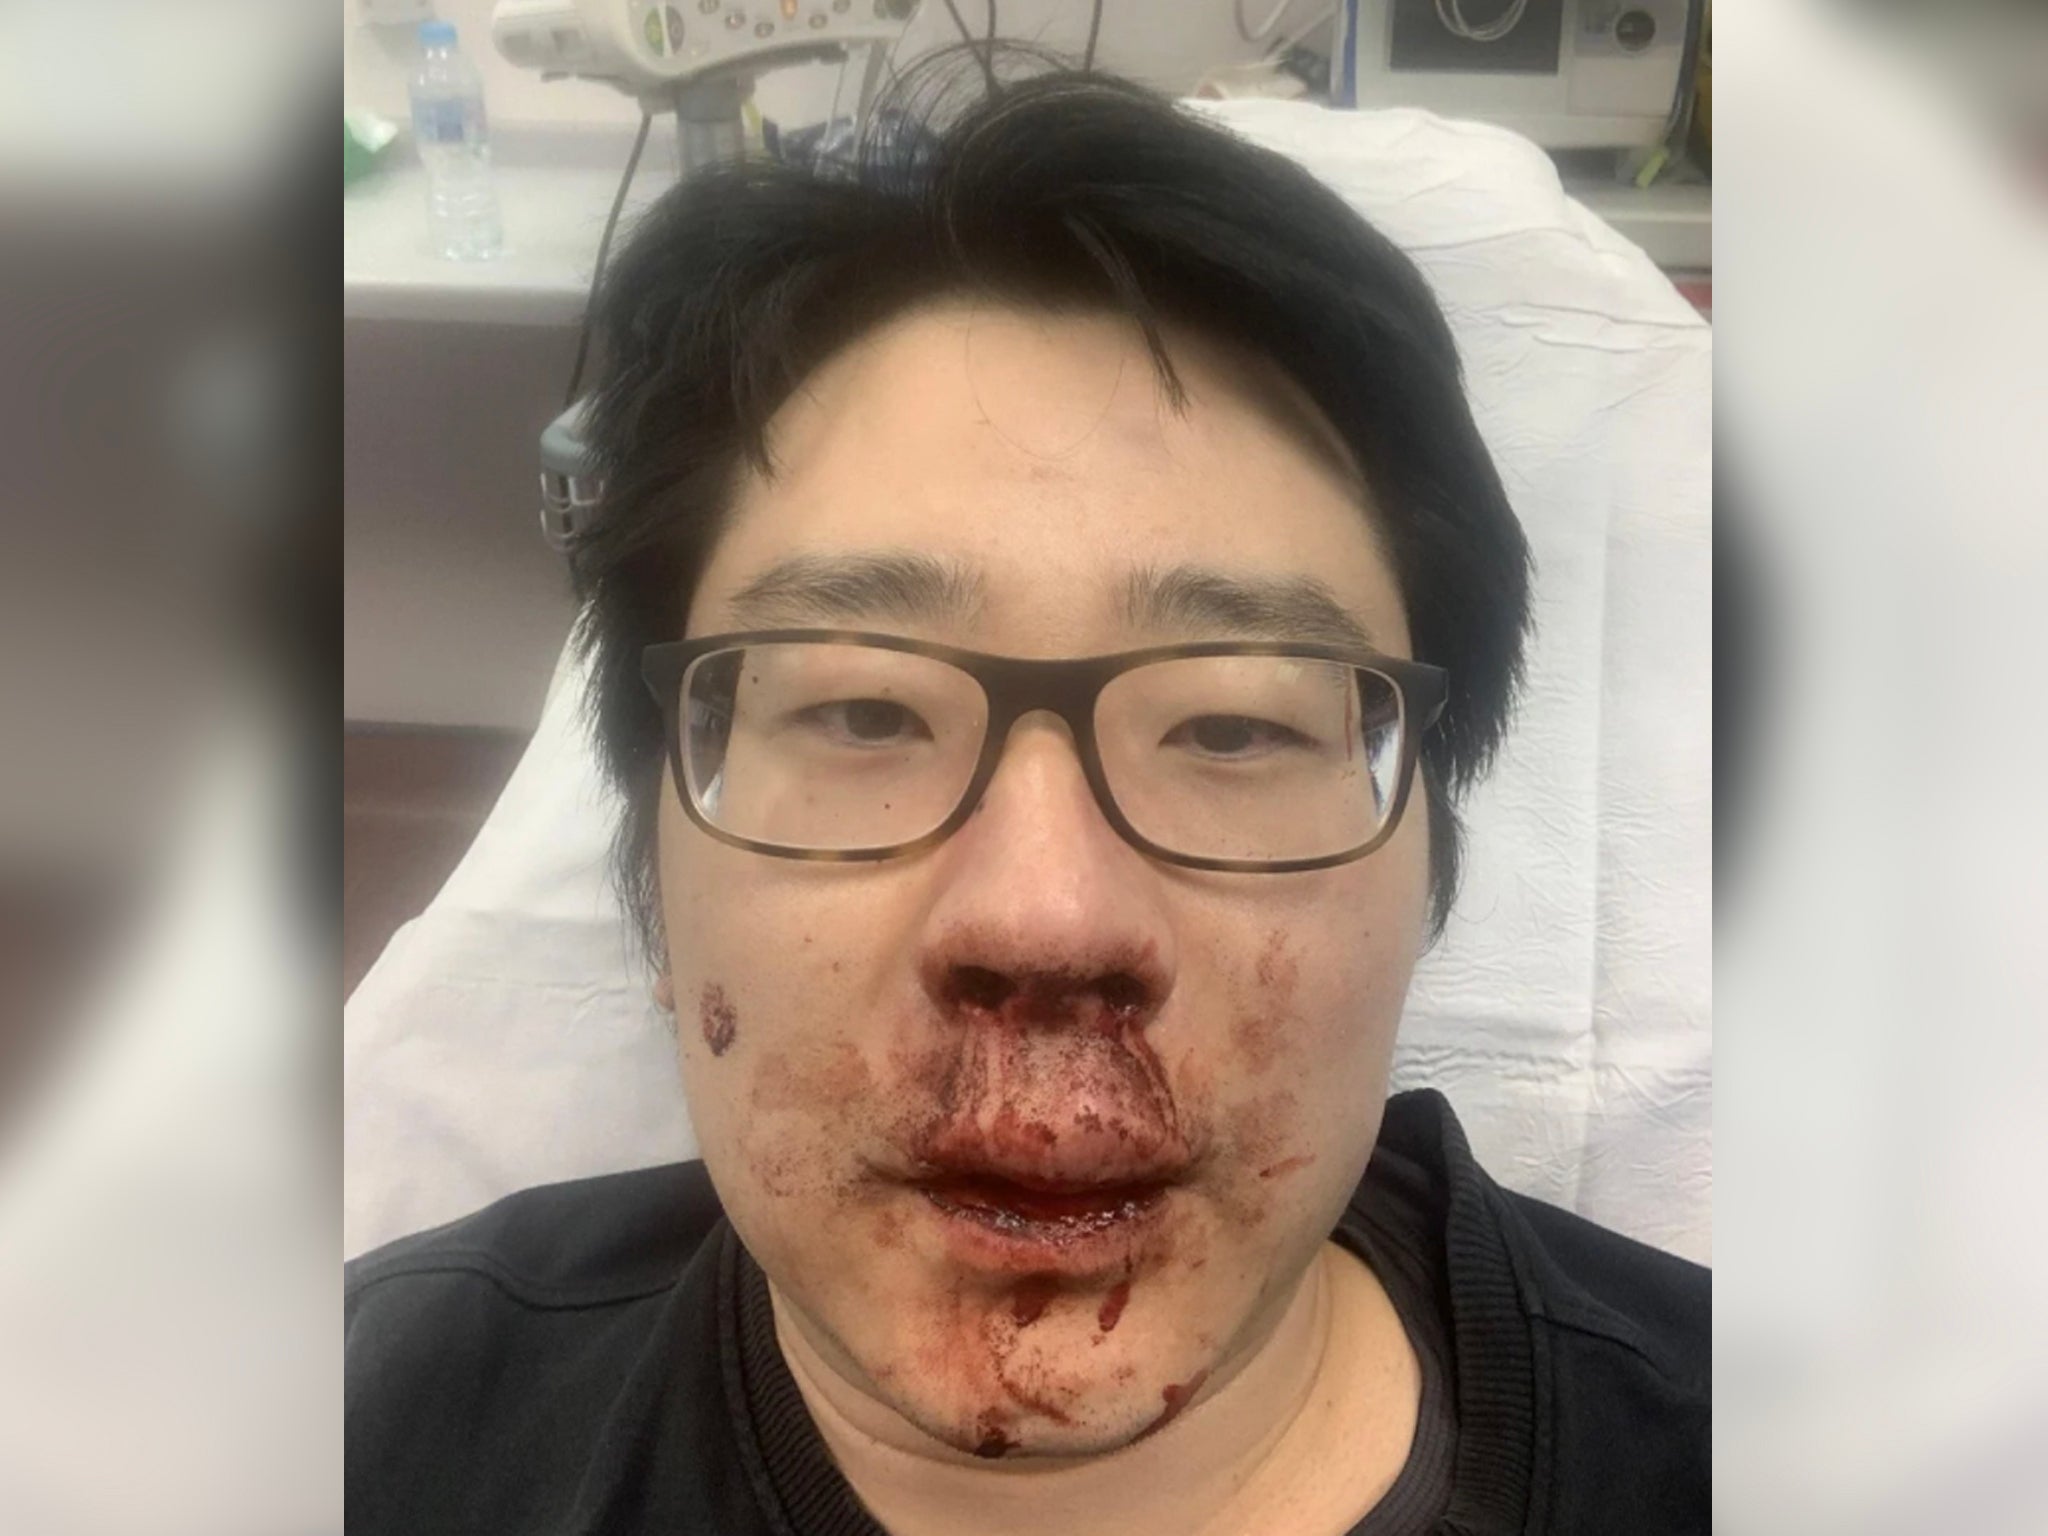 University lecturer Peng Wang, 37, was viciously attacked by four men who shouted racial abuse at him while he was jogging near his home in Southampton